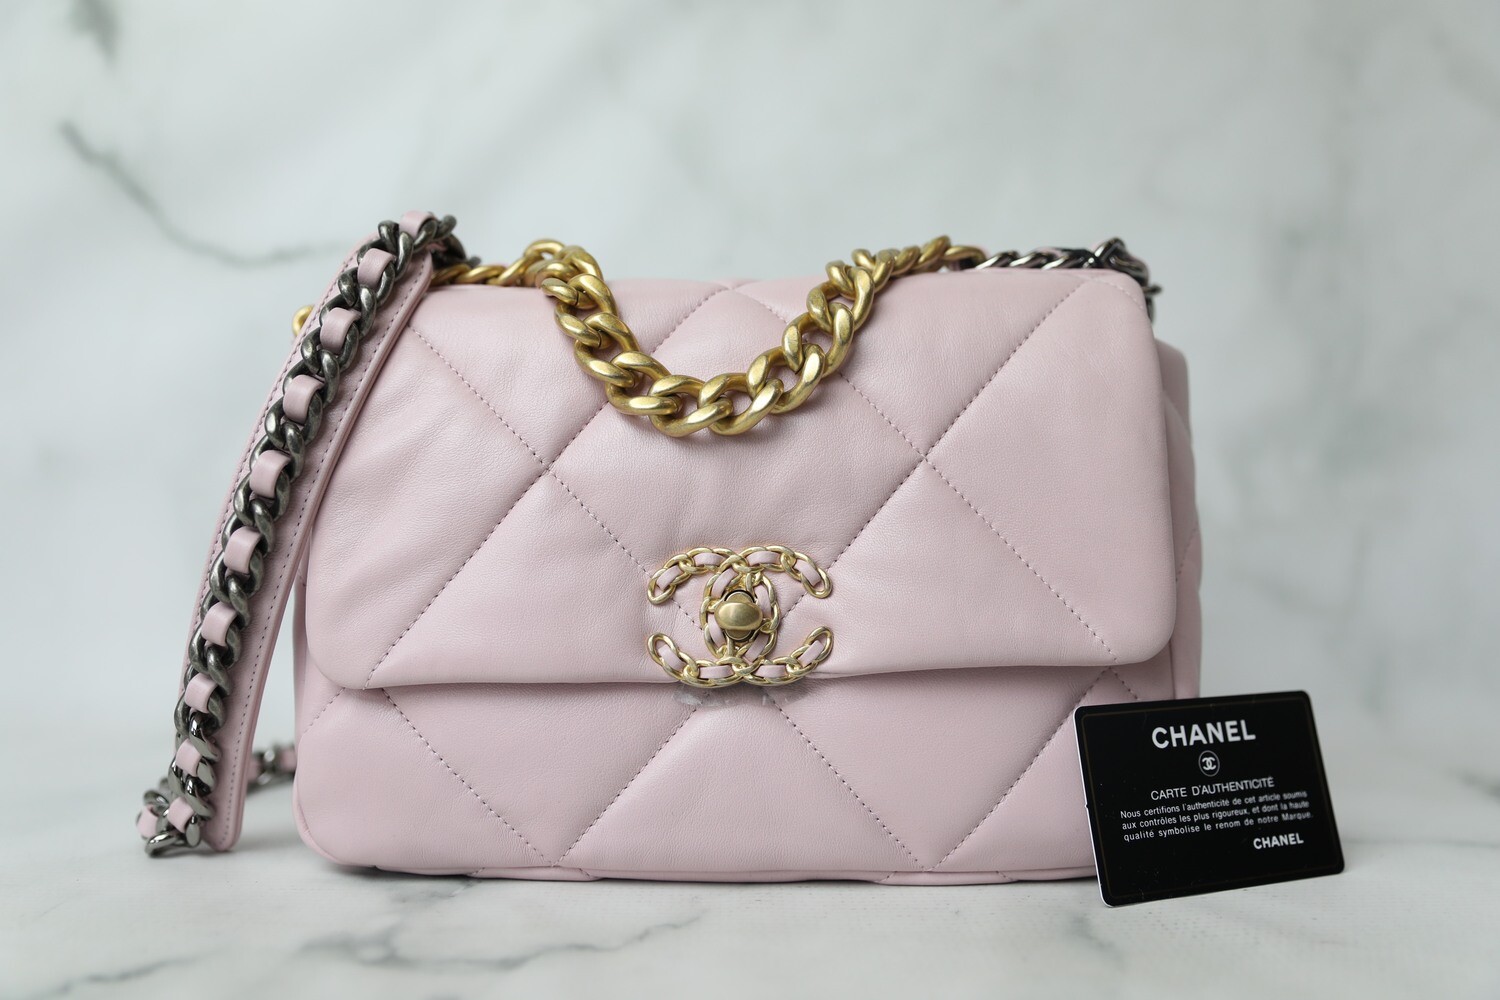 Chanel 19 Small, 21S Pink Leather, New in Box MA001